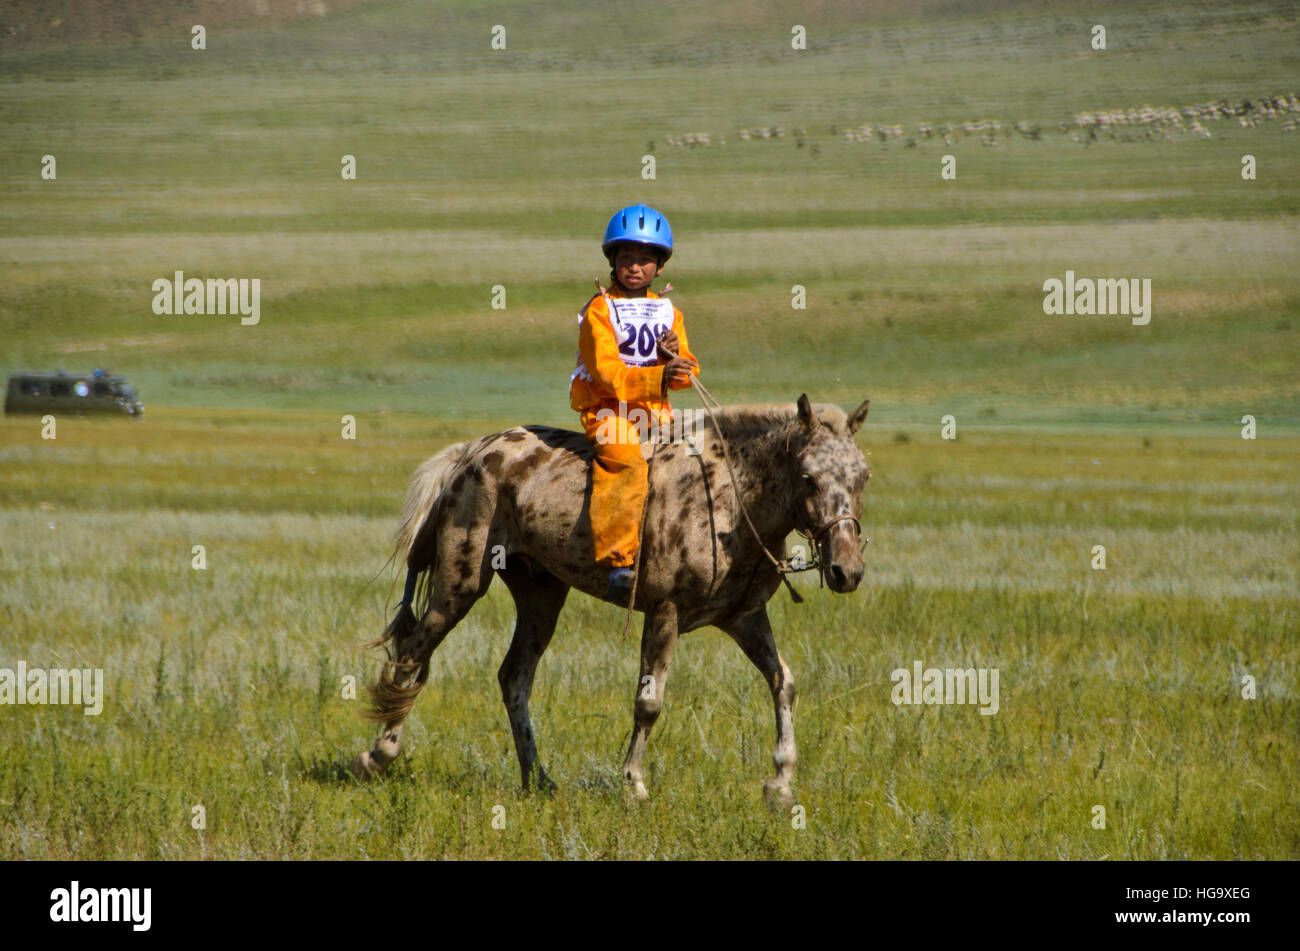 A young horse-rider warming-up for the race, Naadam festival, Moron. Stock Photo